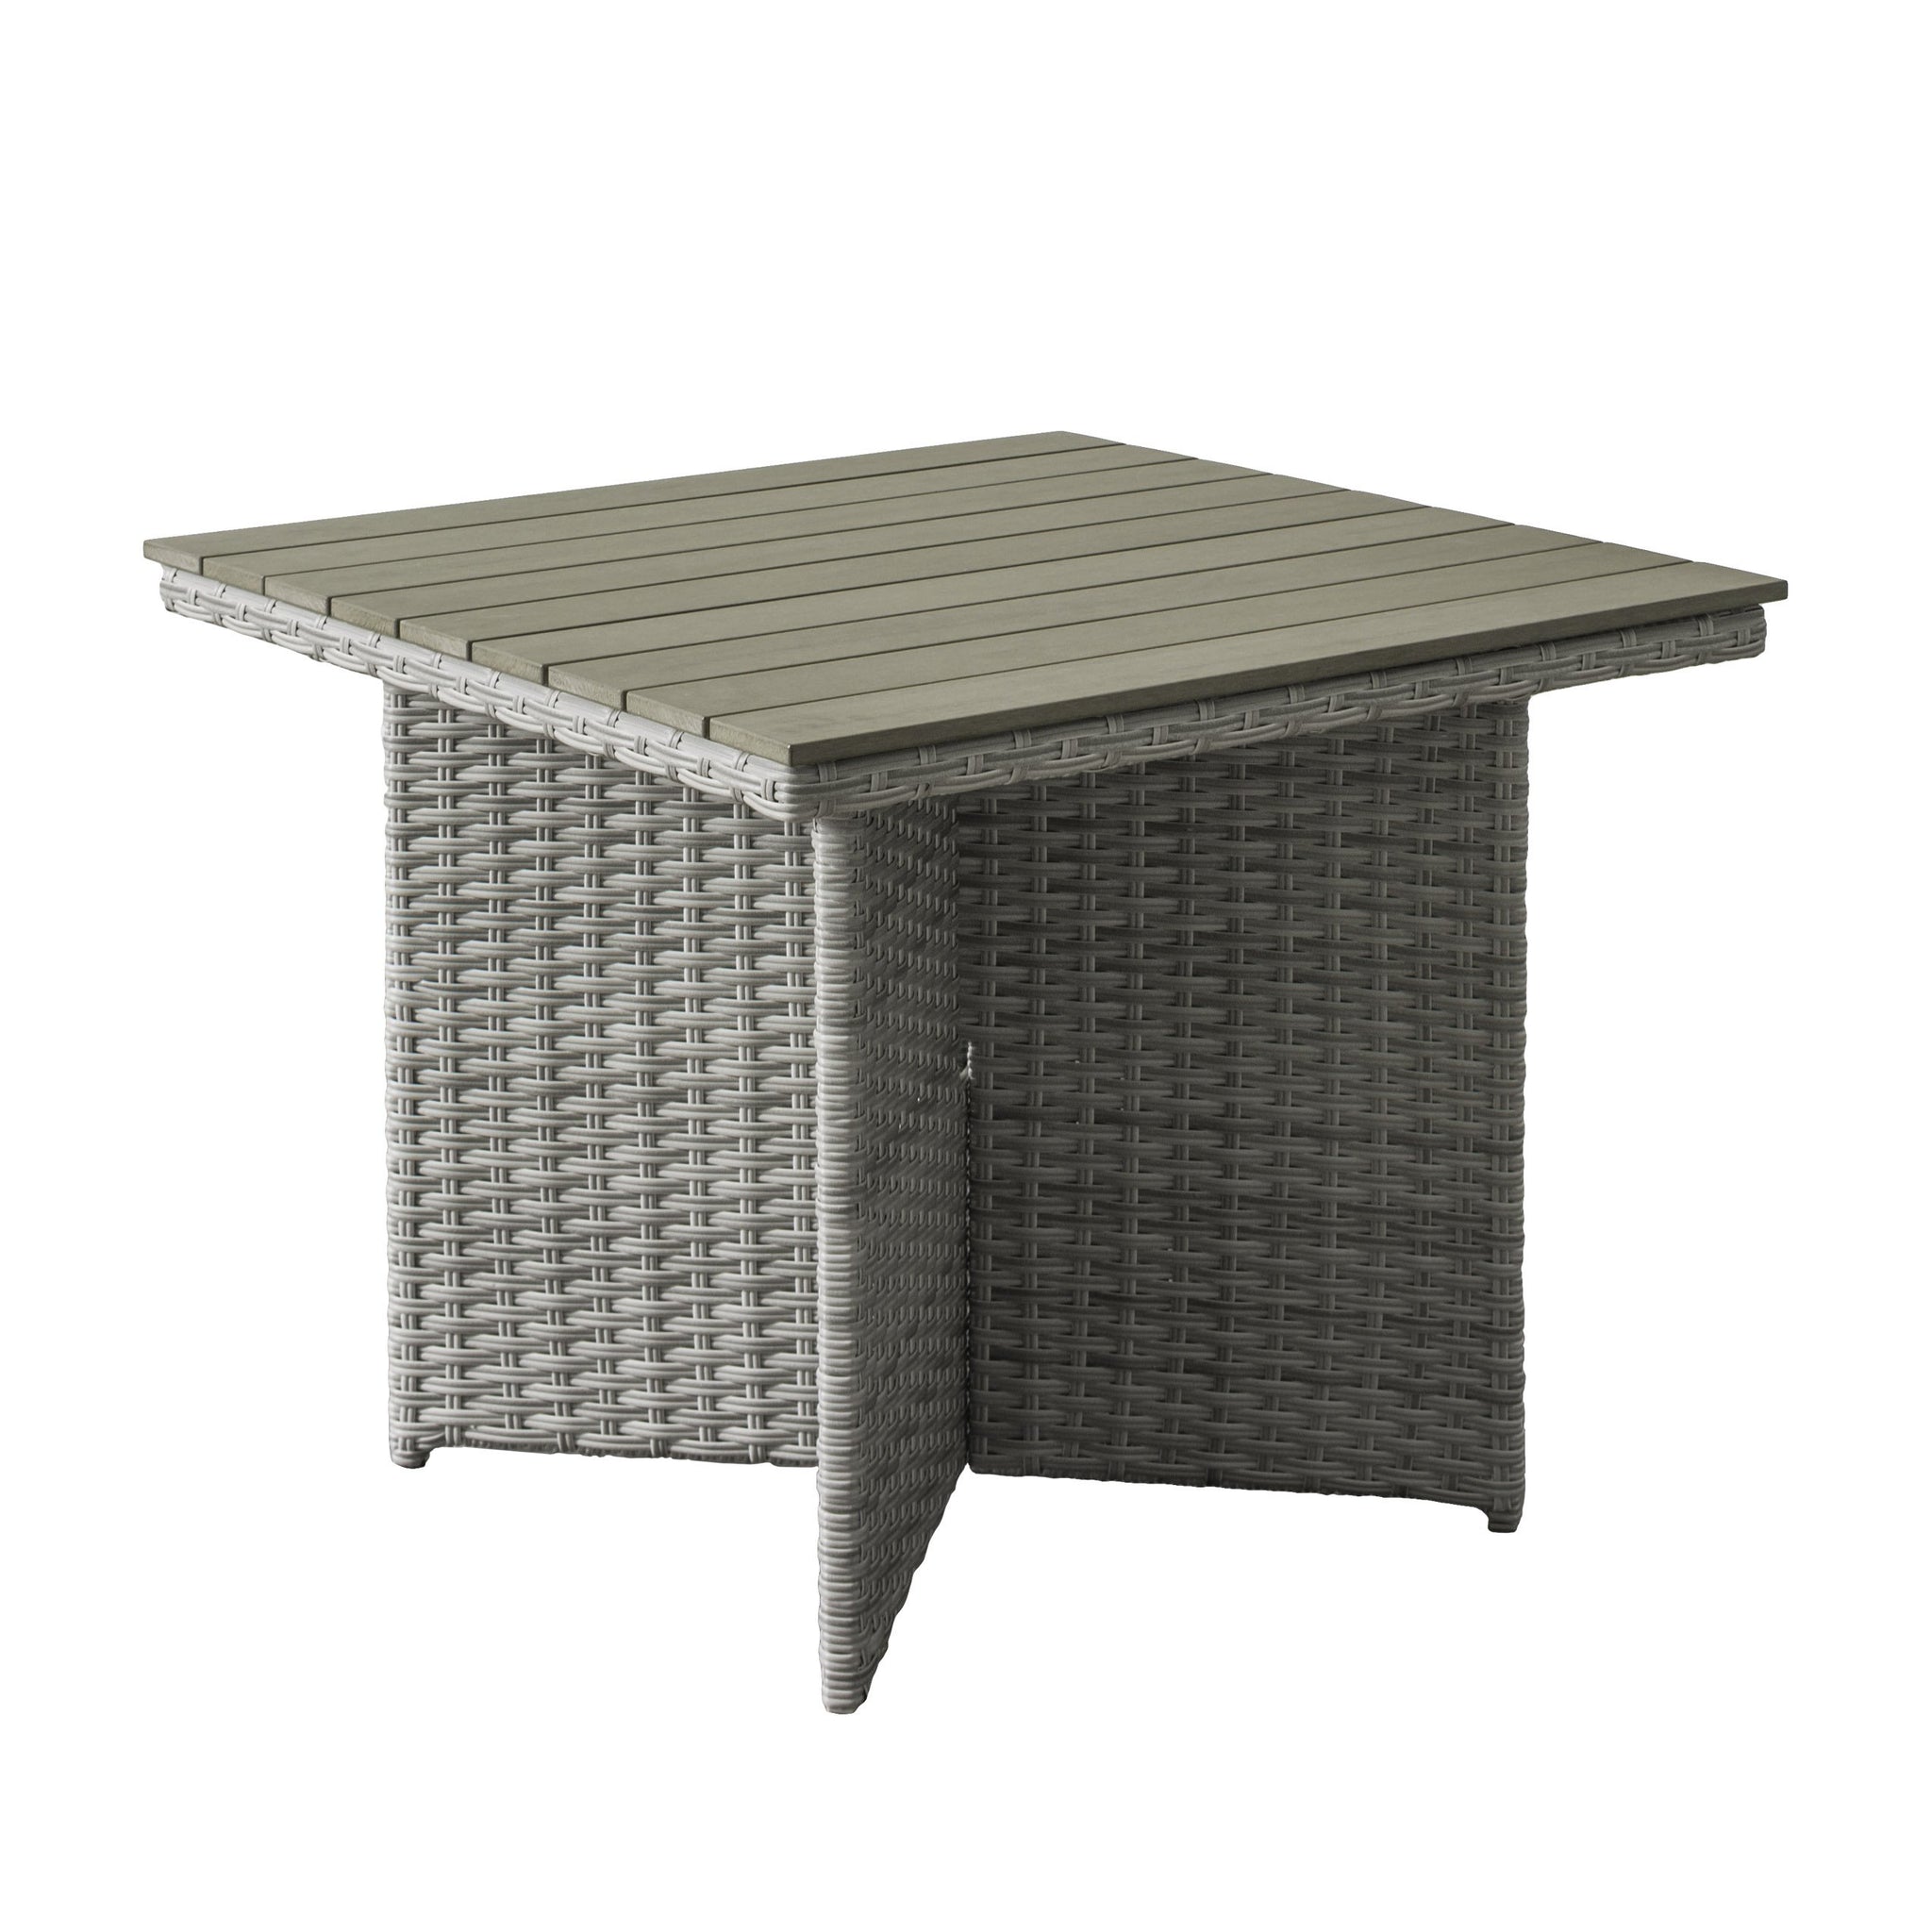 Weather Resistant Resin Wicker Patio Dining Table Clearance